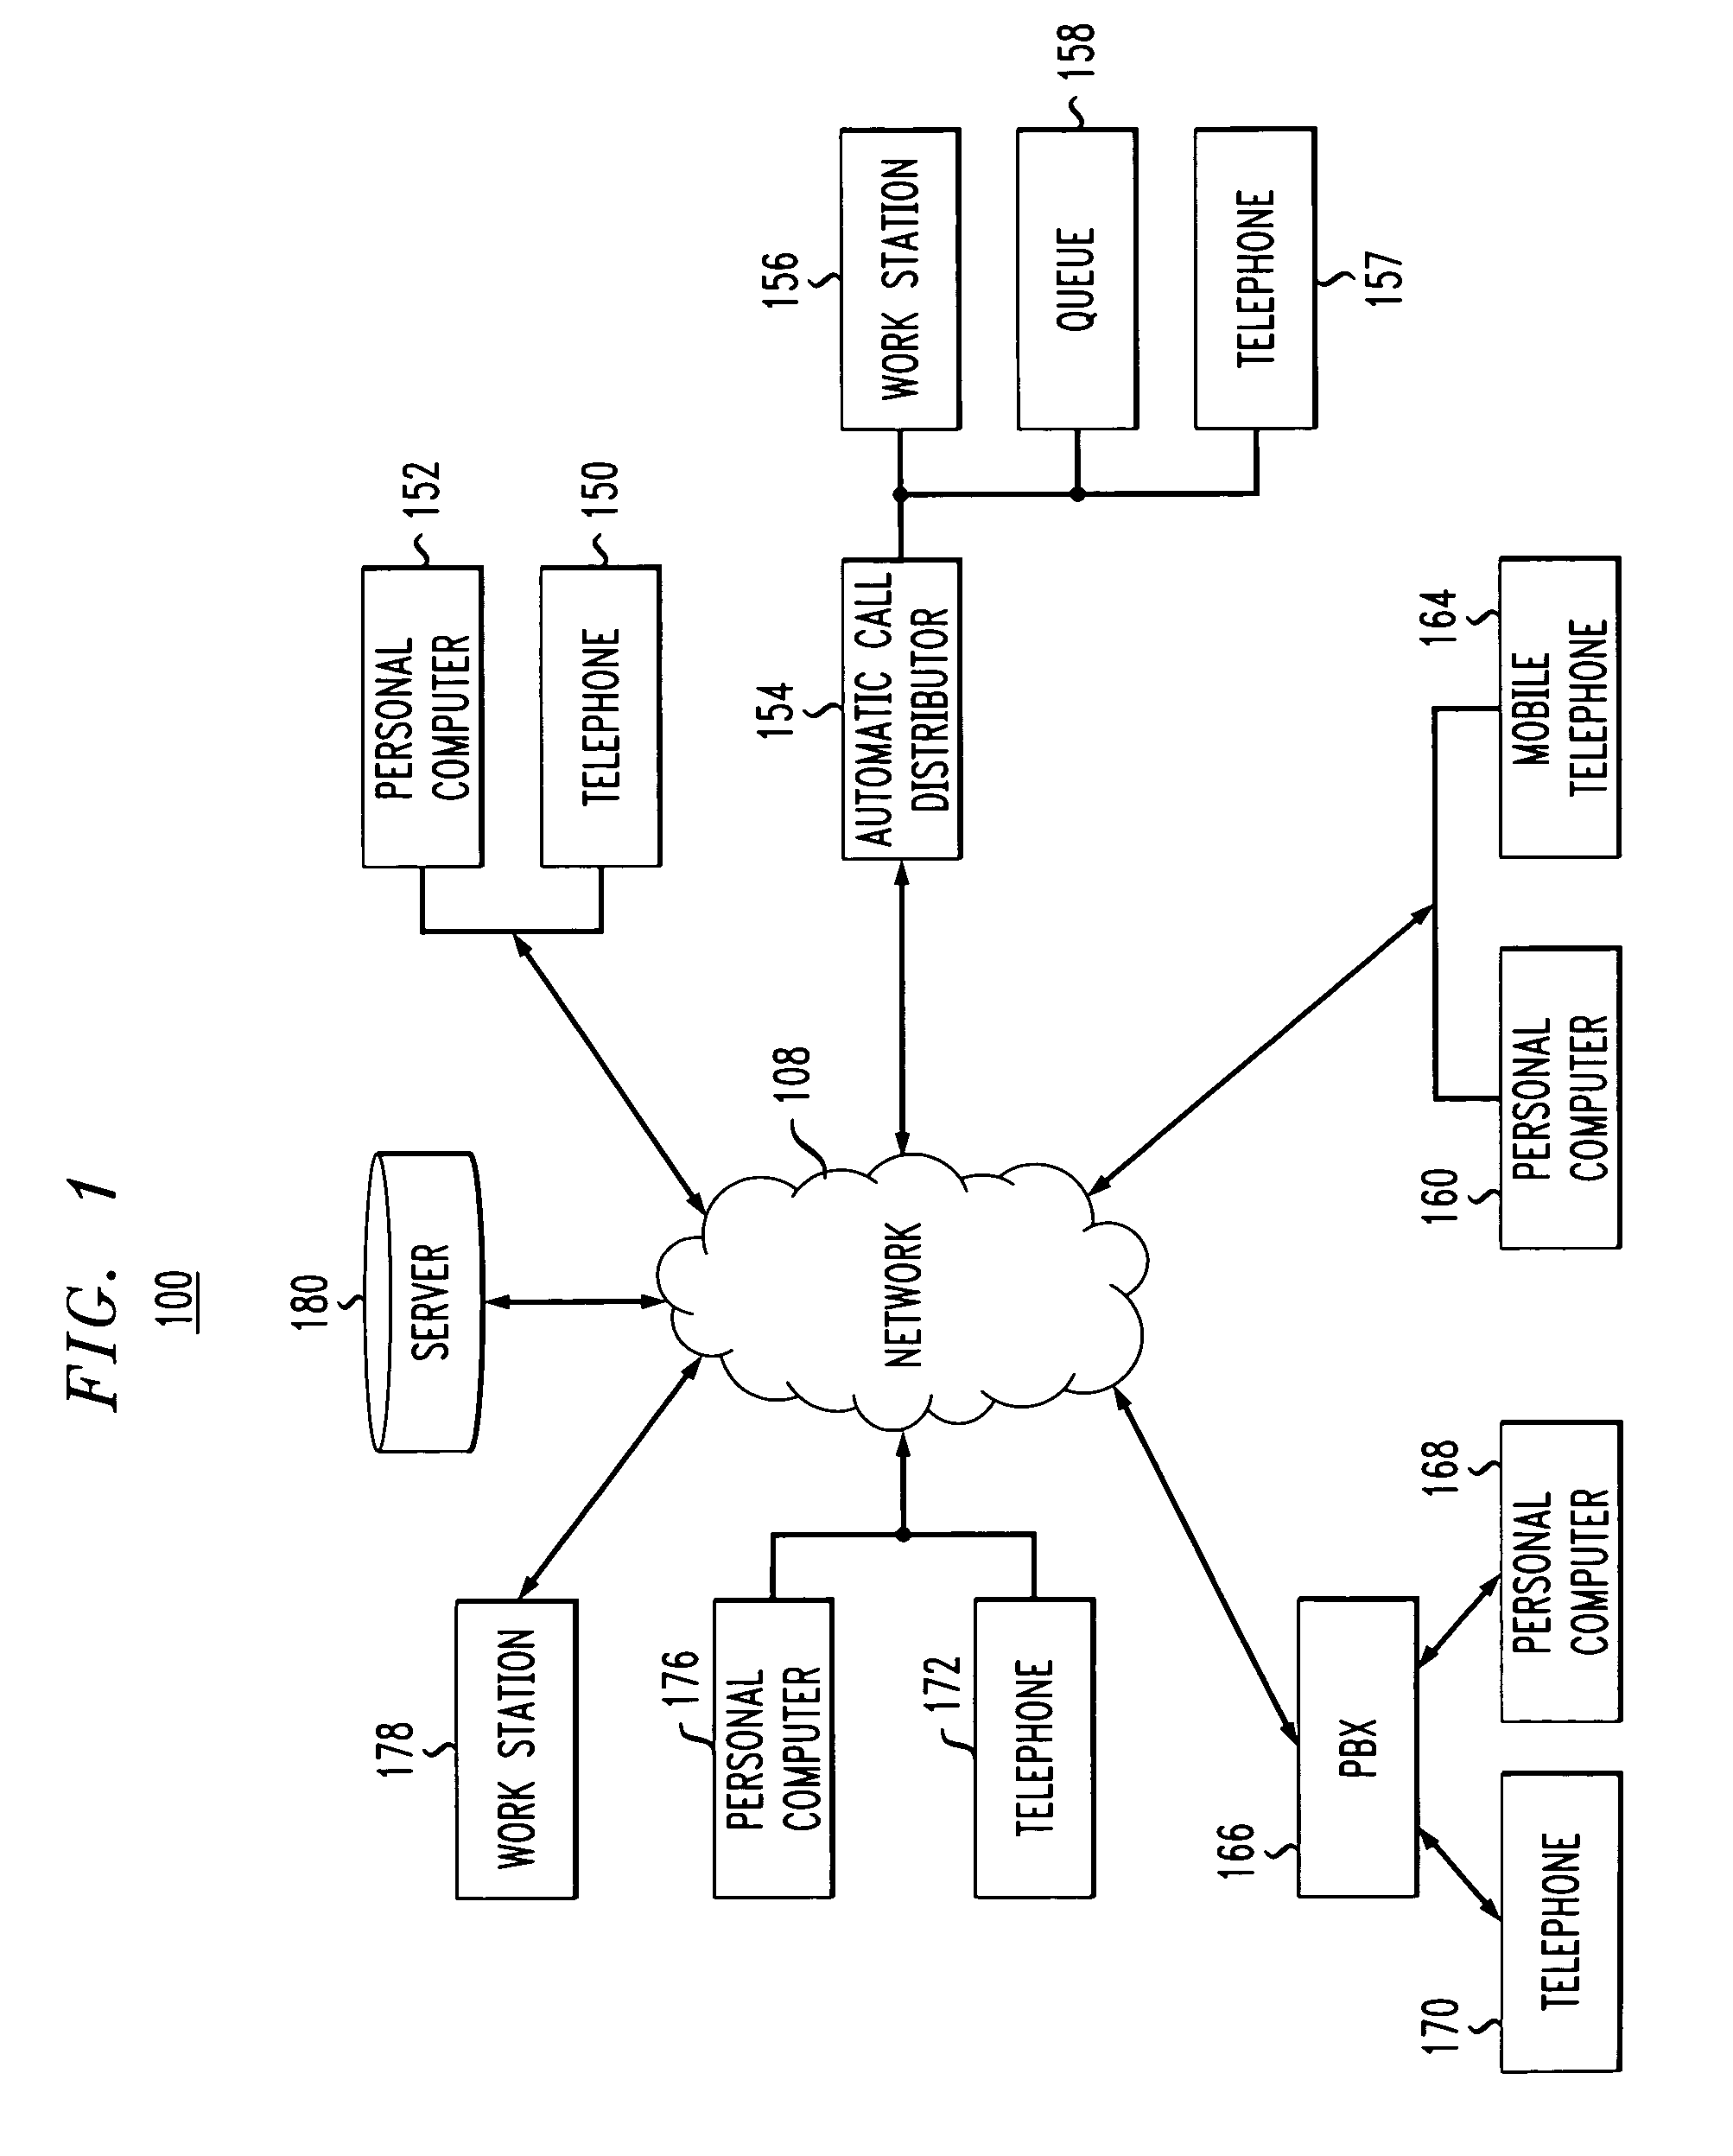 System and method for generating applications for communication devices using a markup language